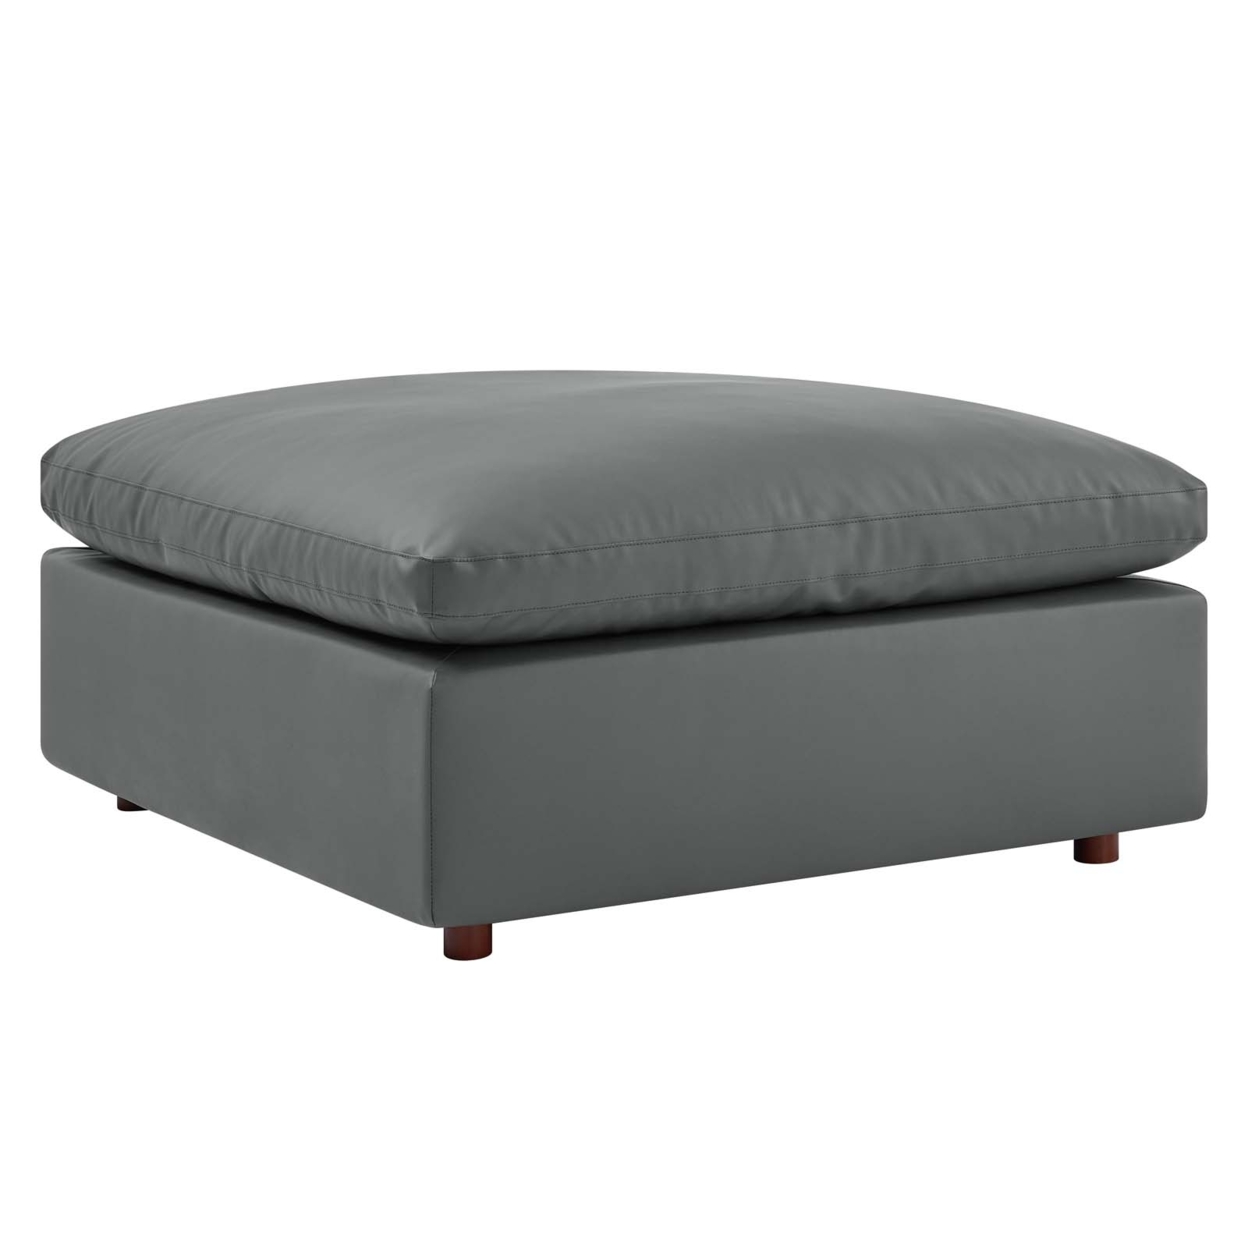 Commix Down Filled Overstuffed Vegan Leather Ottoman, Gray